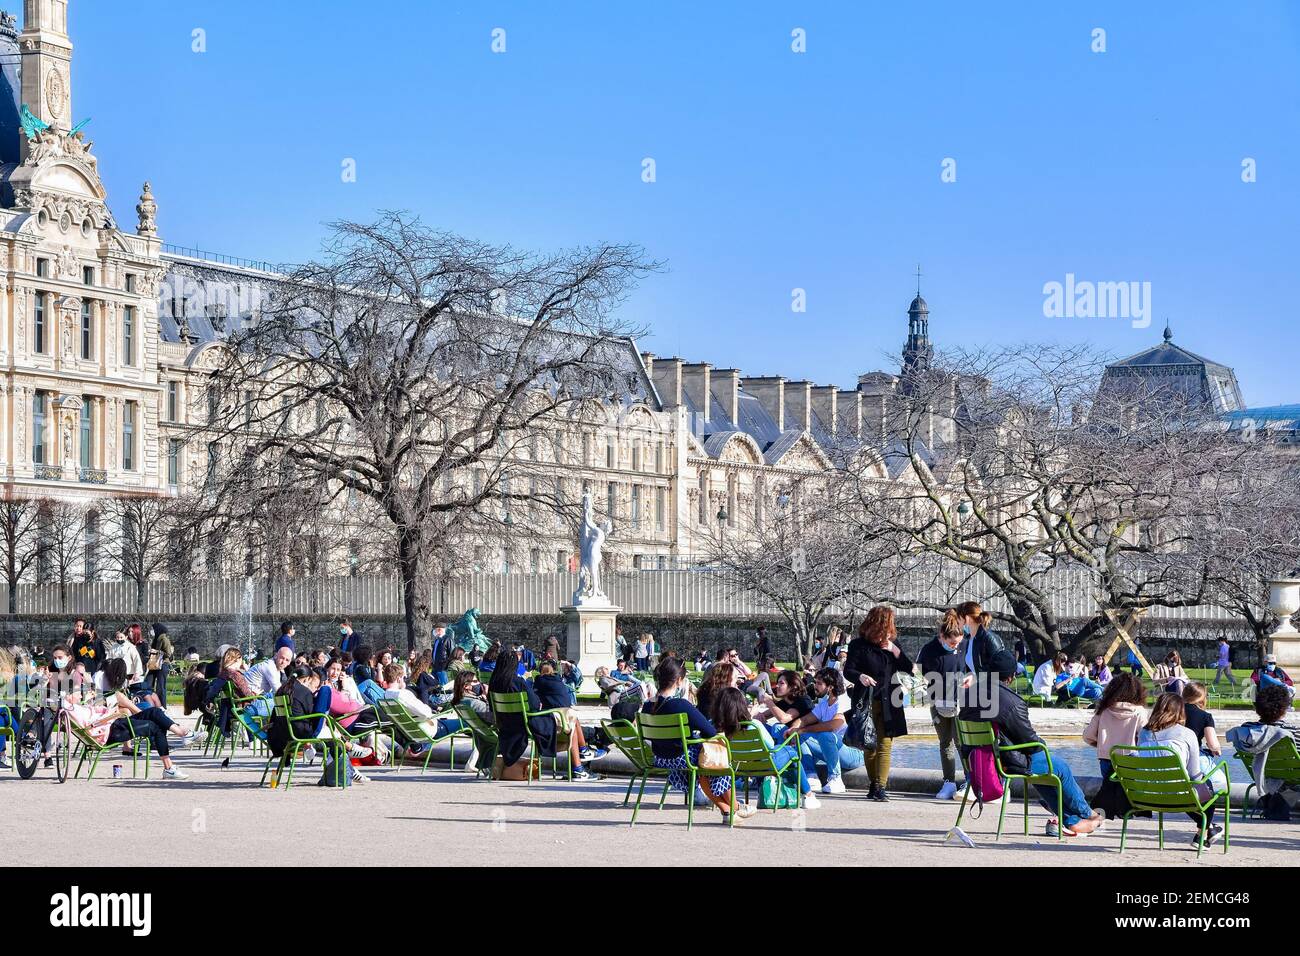 Parisians enjoy the Tuileries Garden despite pandemic Covid-19, with the beautiful warm spring weather in Paris, France on February 24, 2021. Photo by Jana Call me J/ABACAPRESS.COM Stock Photo